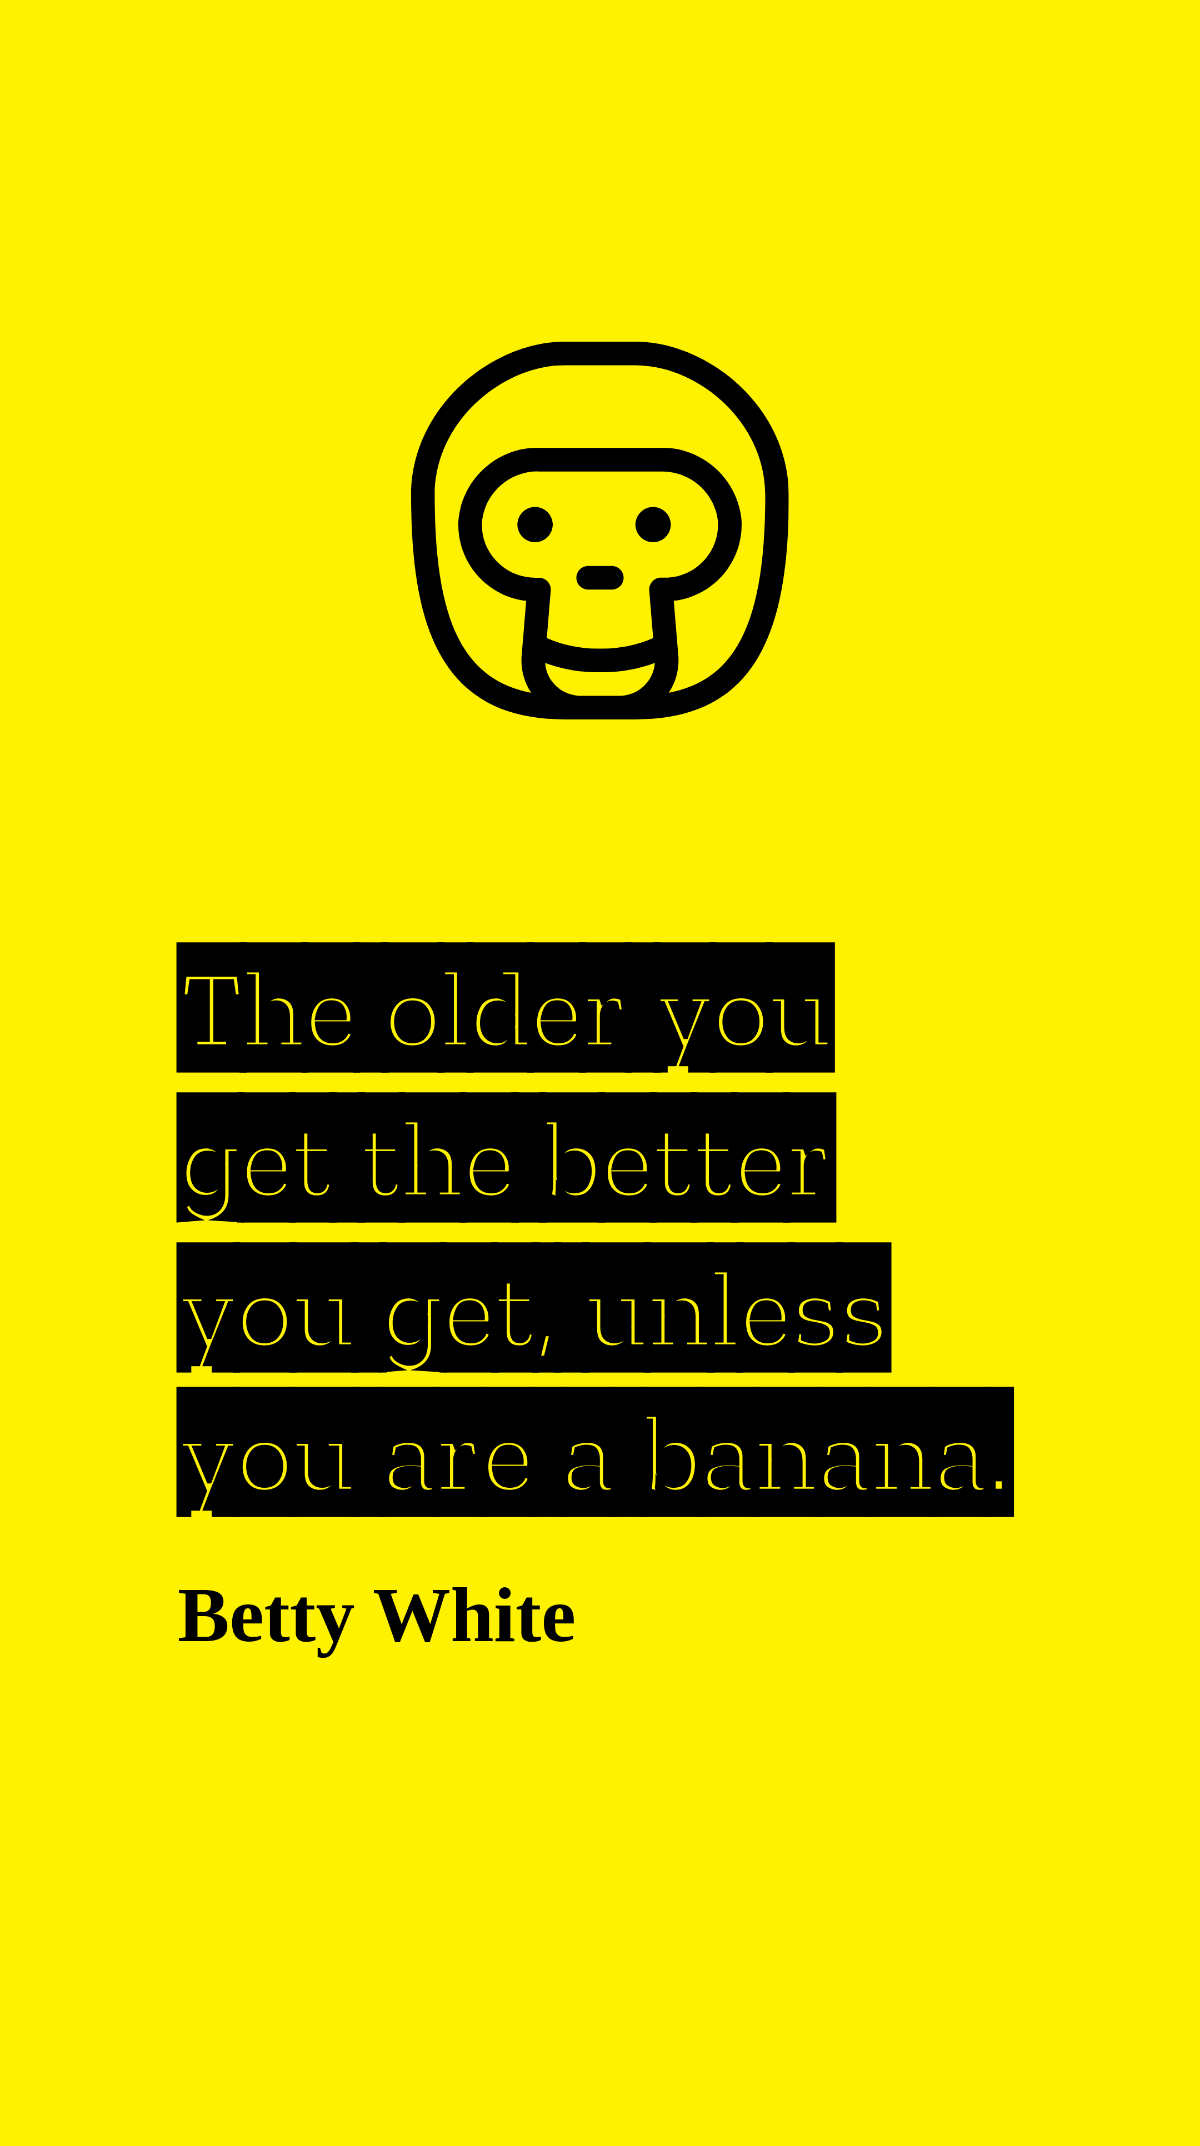 Betty White - The older you get the better you get, unless you are a banana. Template